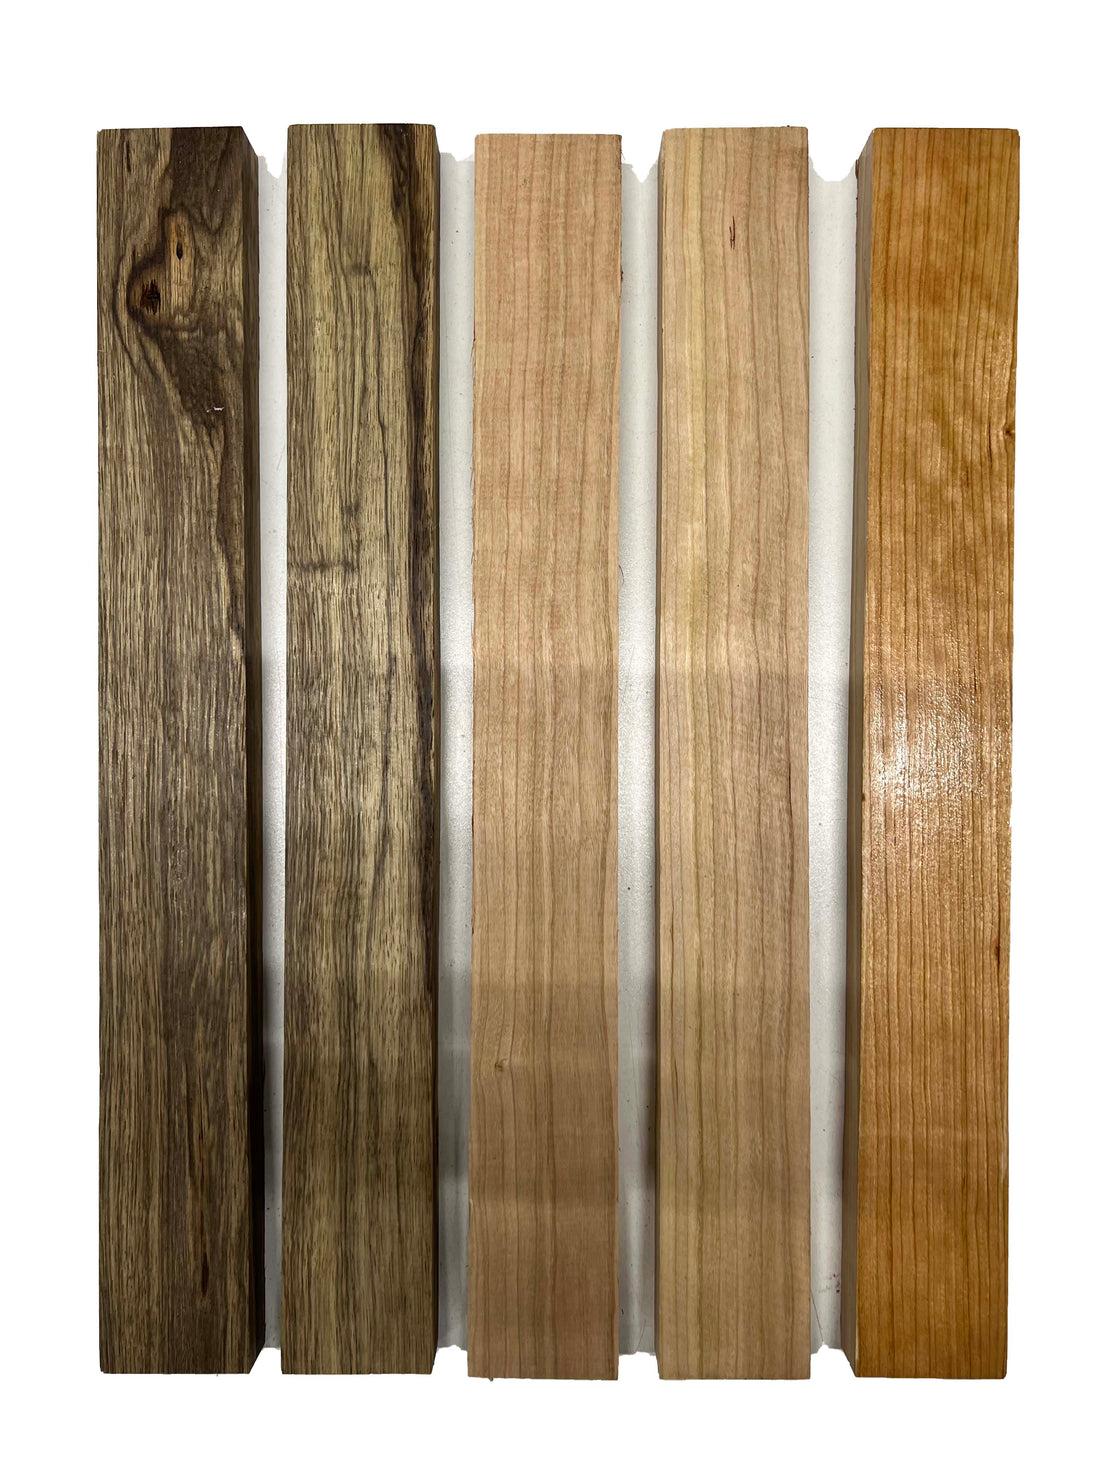 Pack of 5, Black Limba+Cherry Thin Stock Lumber Board Blanks-16&quot;x2&quot;x3/4&quot; 